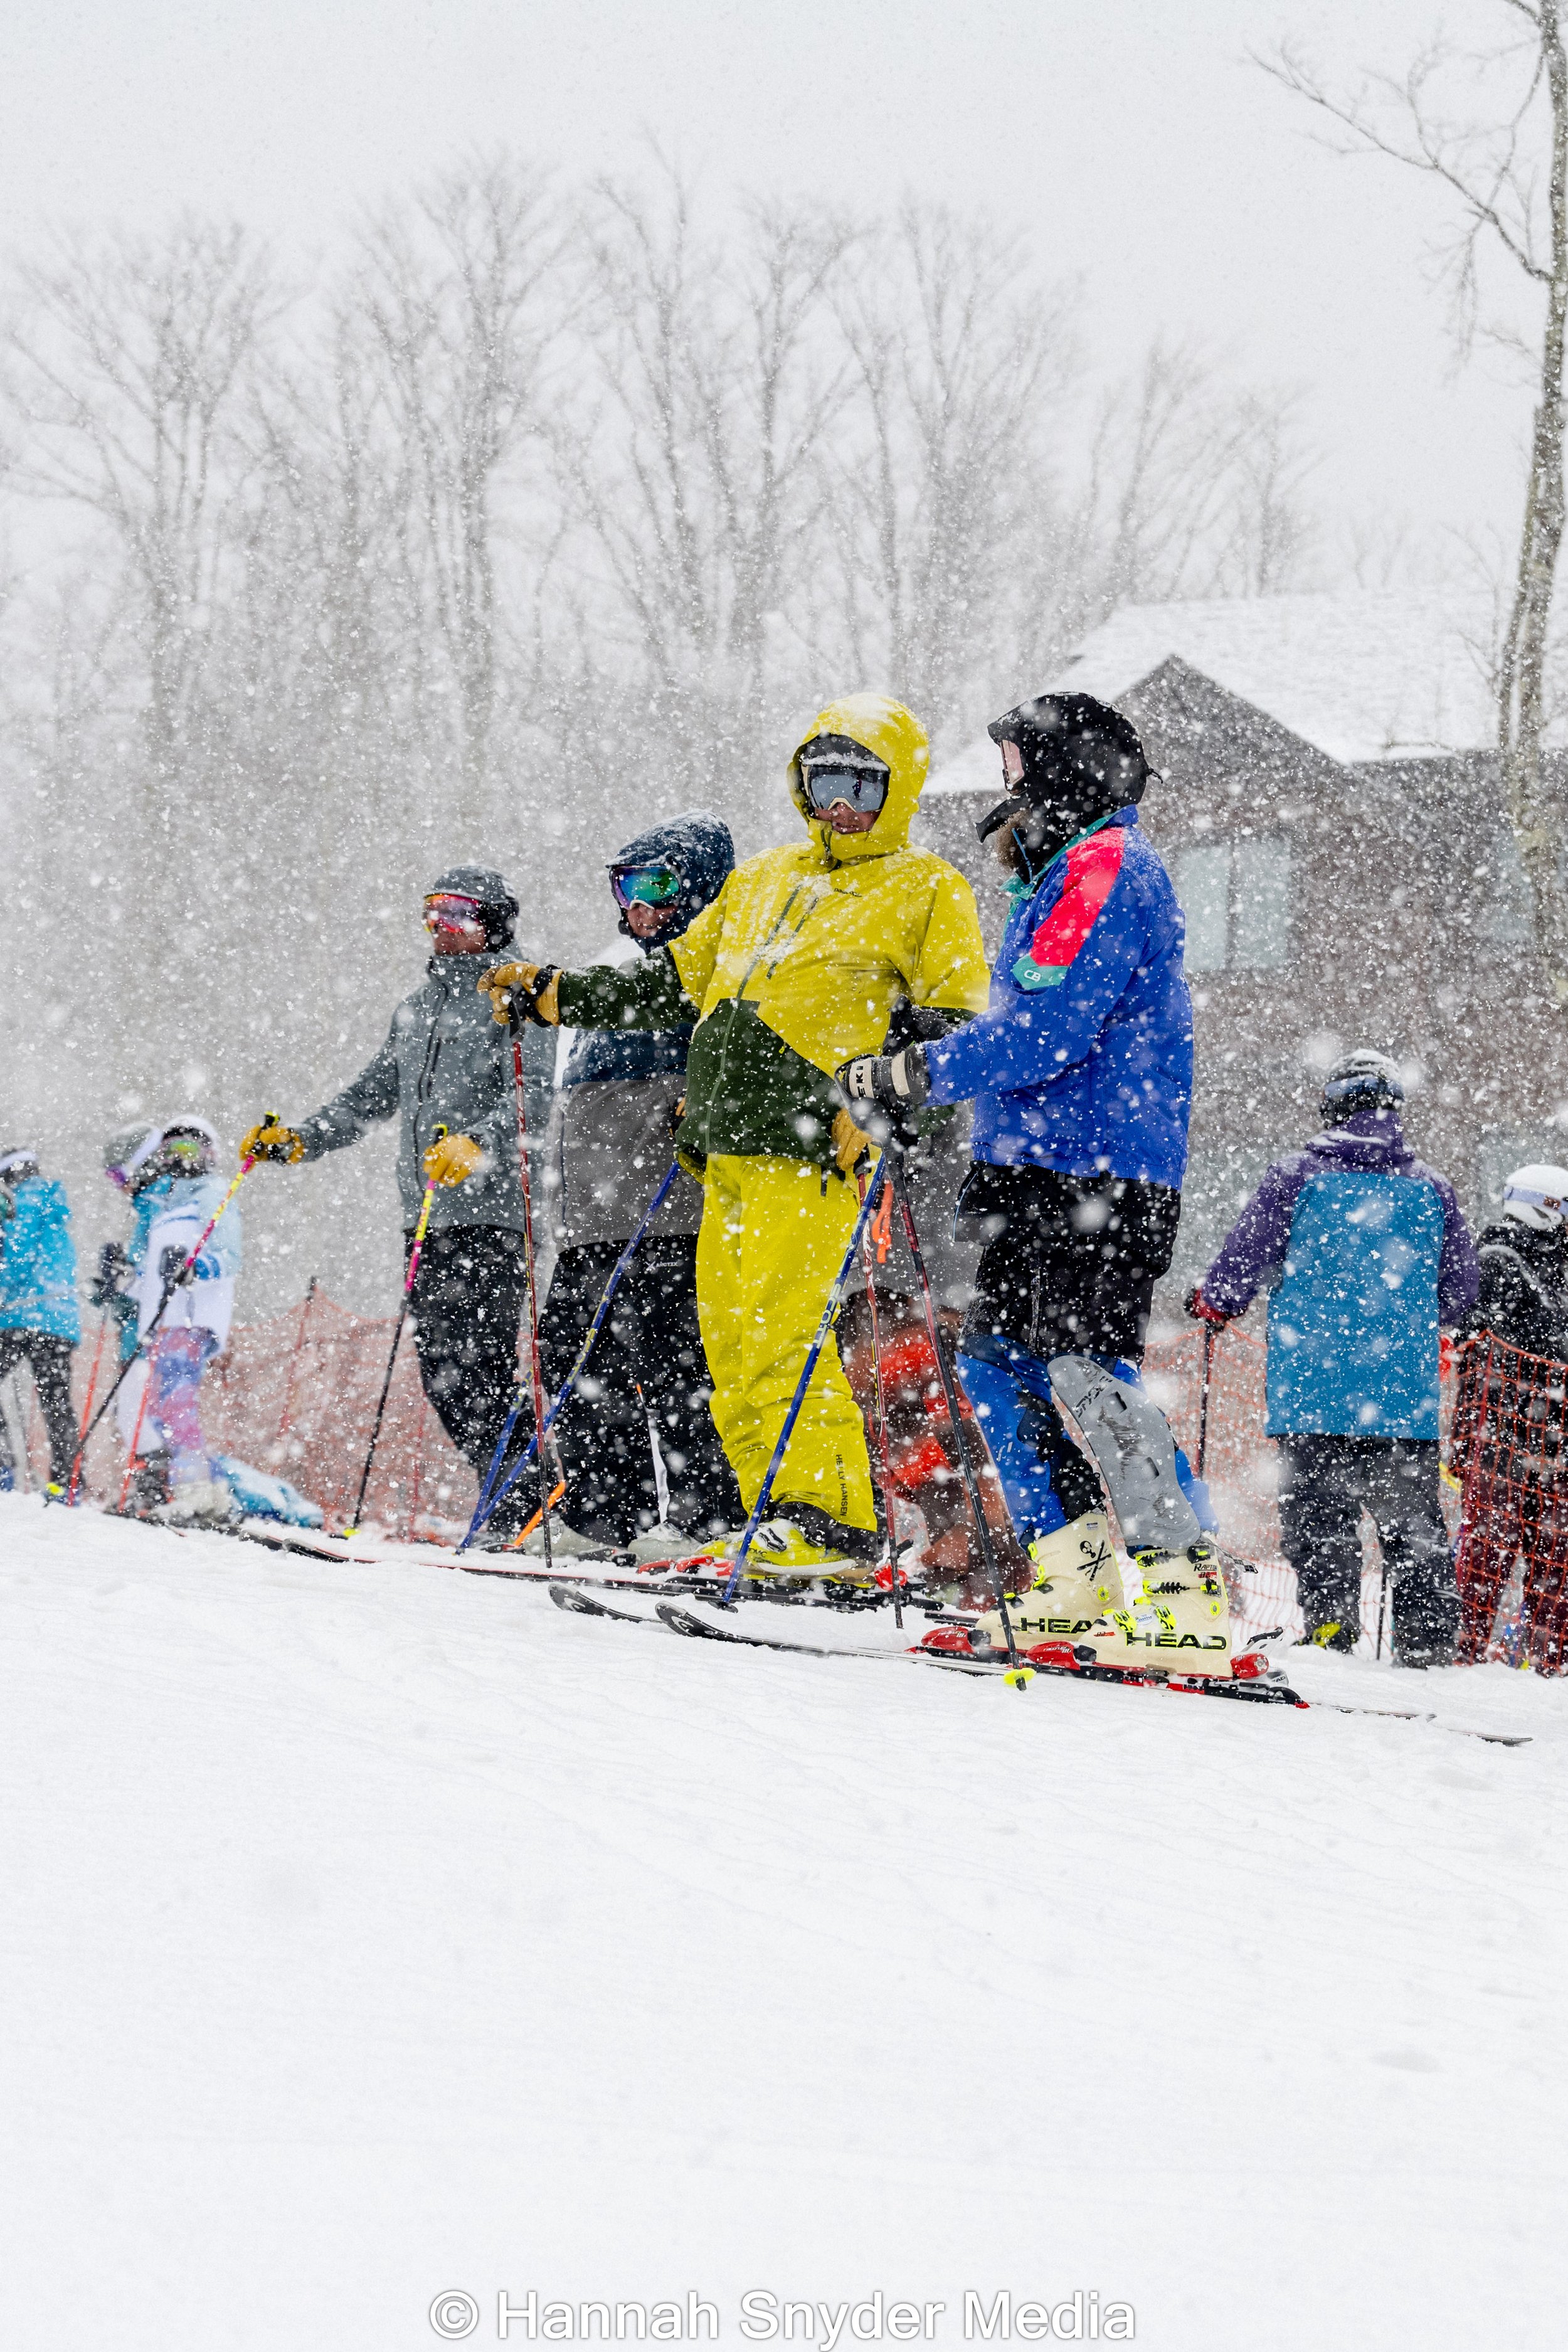 63rd WV Governors Cup Ski Race has Record-Breaking Number of Participants! — Appalachian Forest National Heritage Area